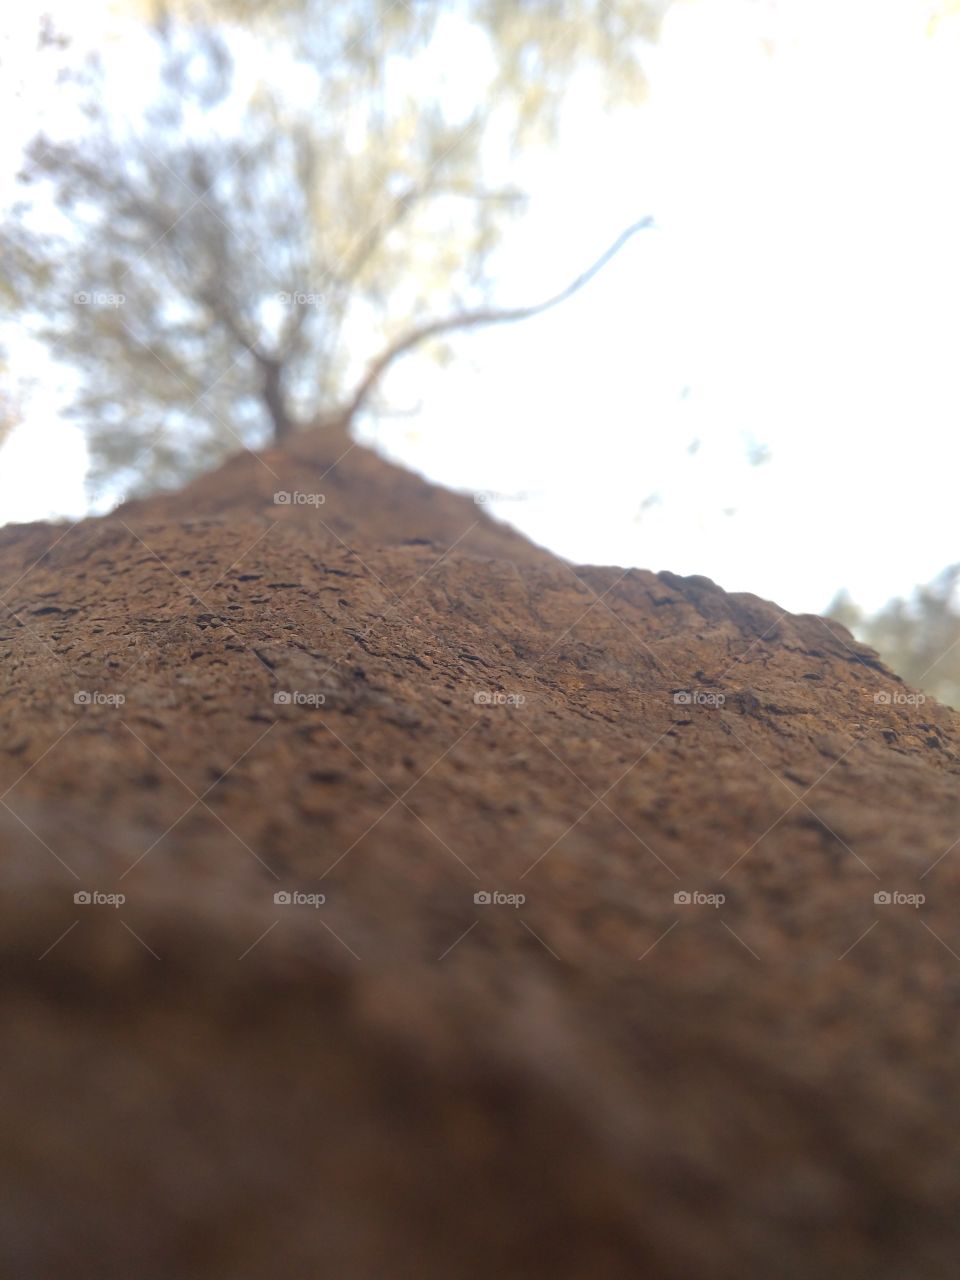 close-up pic of trunk of a tree from ground